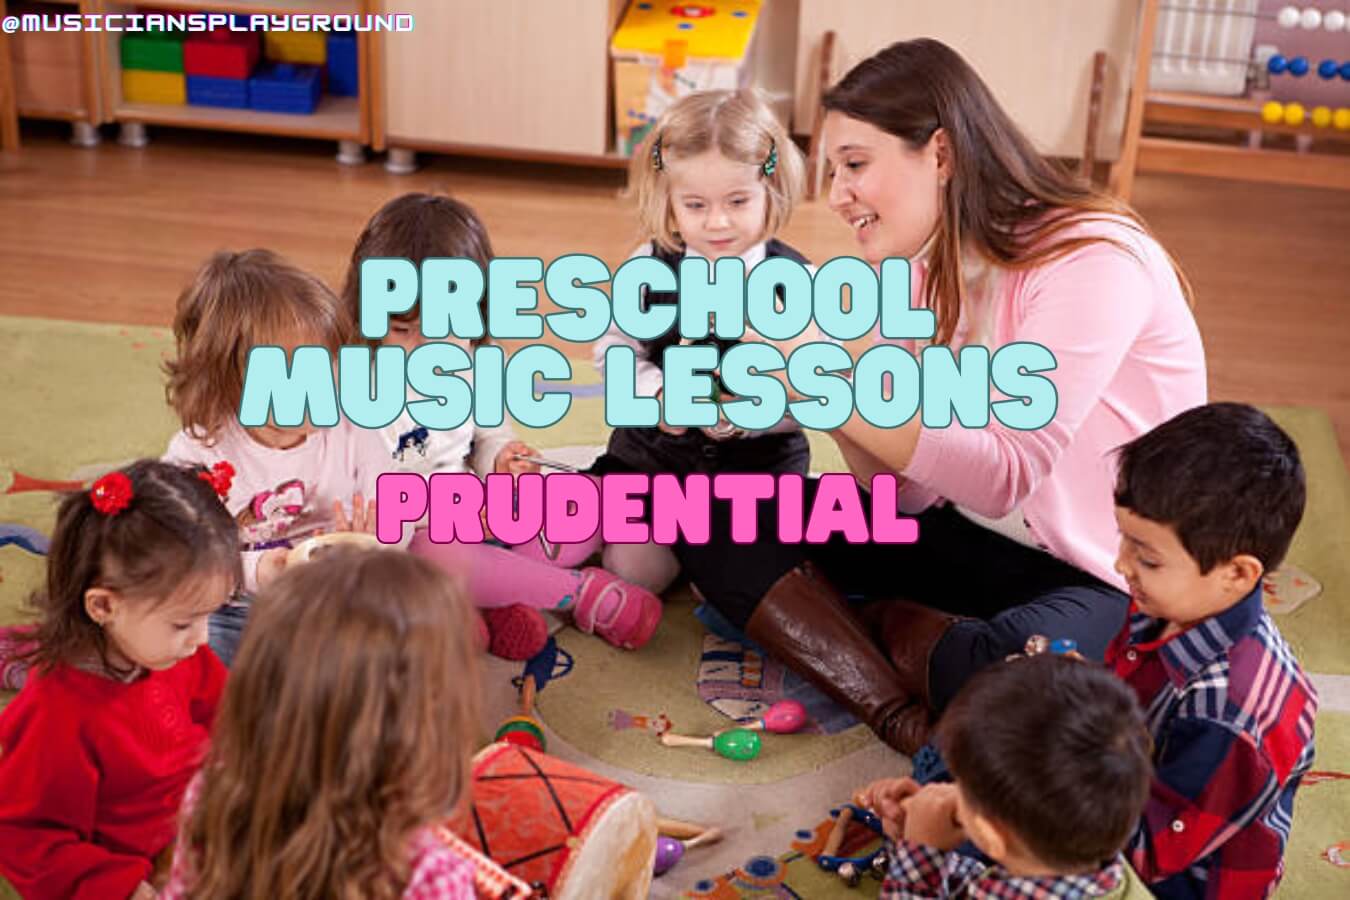 Preschool Music Lessons in Prudential, Massachusetts: Music Education for Young Children at Musicians Playground